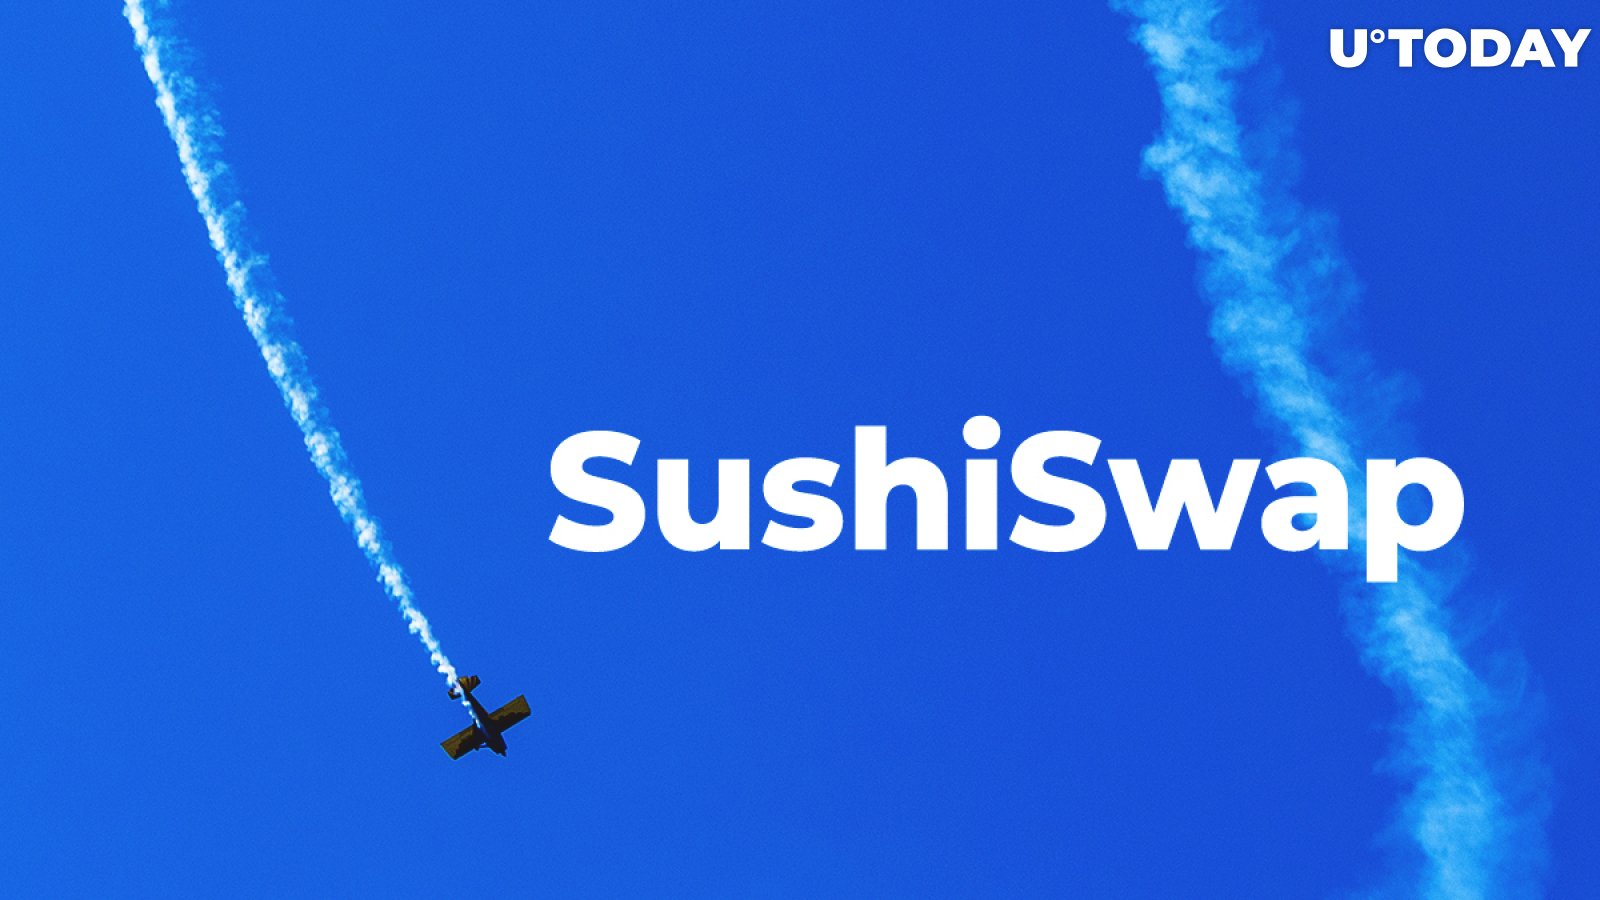 SushiSwap (SUSHI) Tanks Below $1 as Protocol’s Liquidity Continues to Bleed